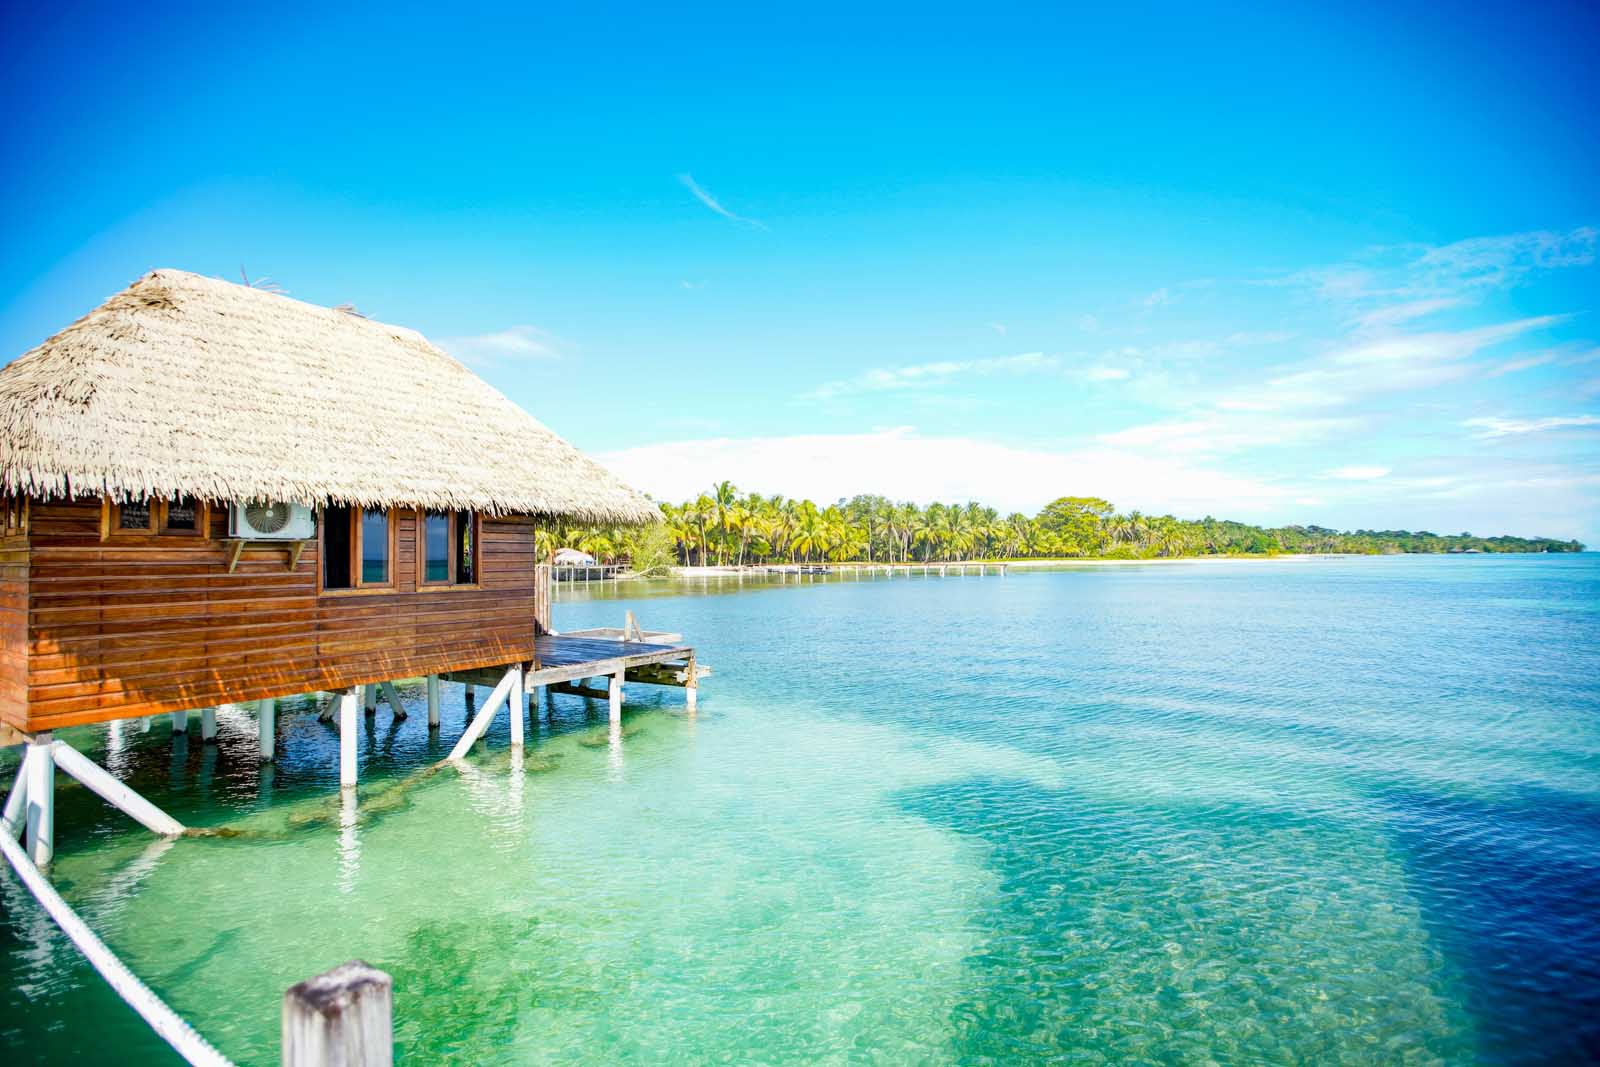 Amazing Overwater Bungalows in the Caribbean Azul Paradise, the Panama eco resort